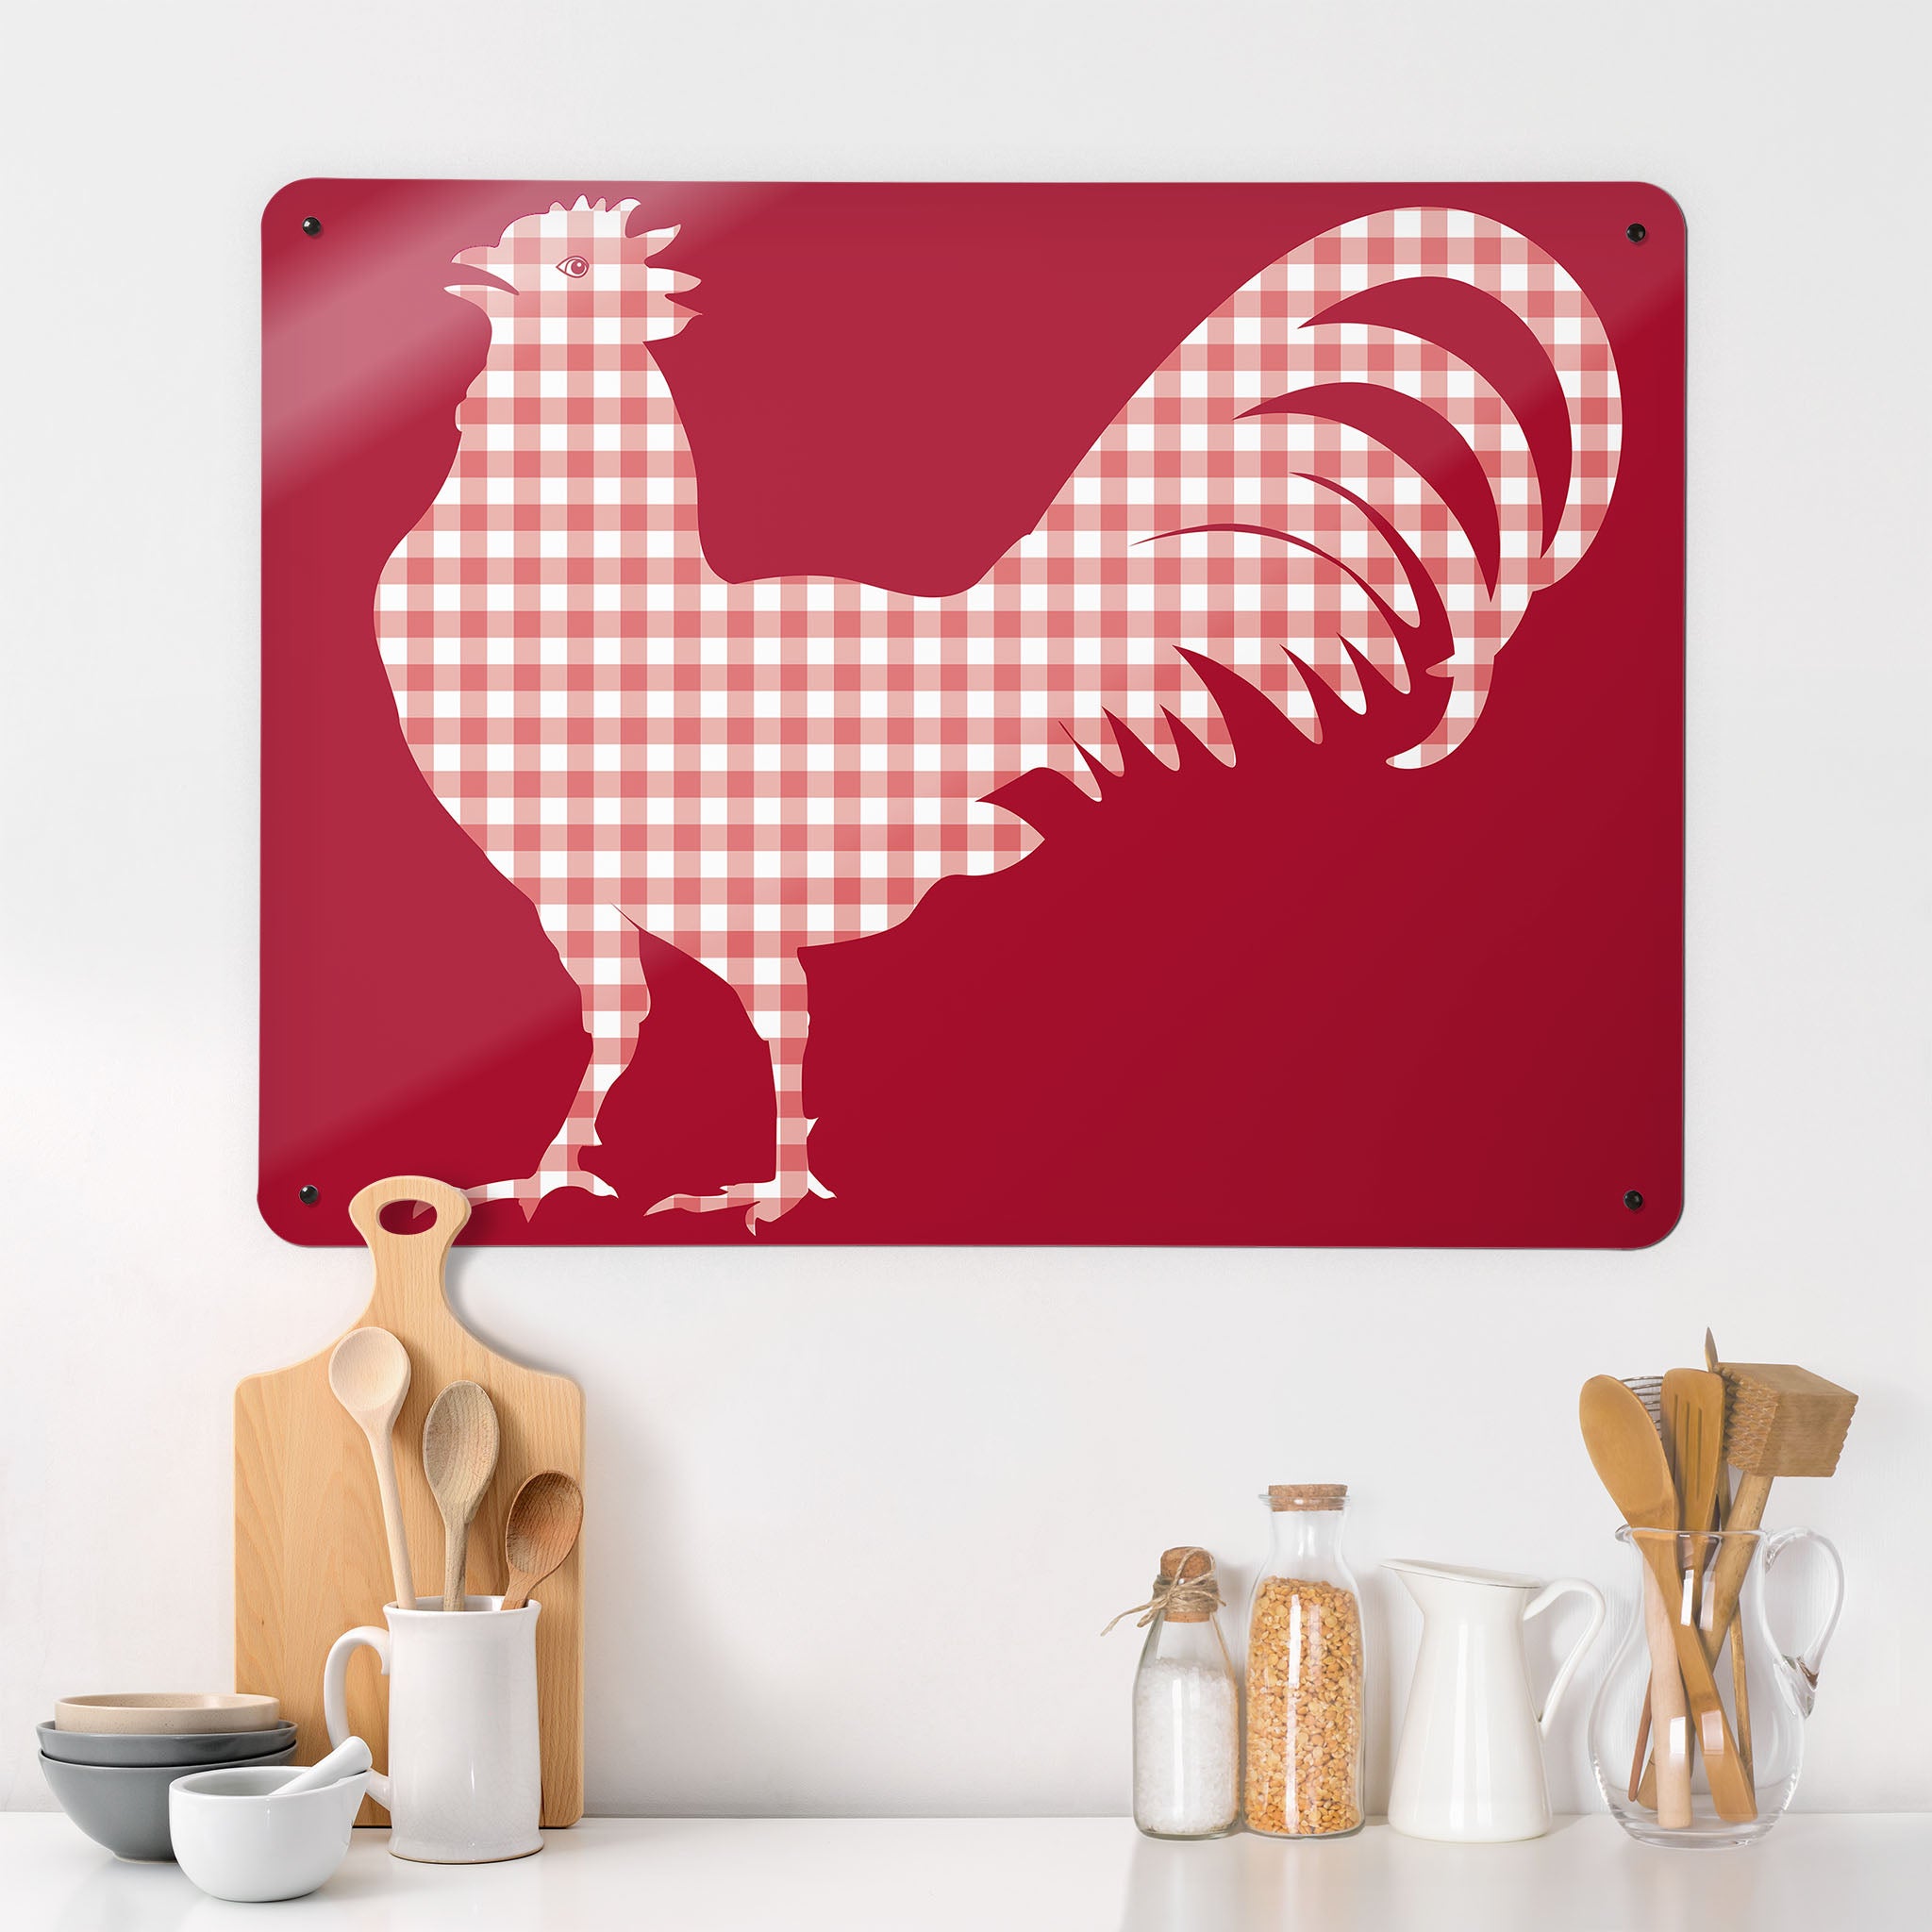 A kitchen interior with a magnetic metal wall art panel with a red gingham cockerel design